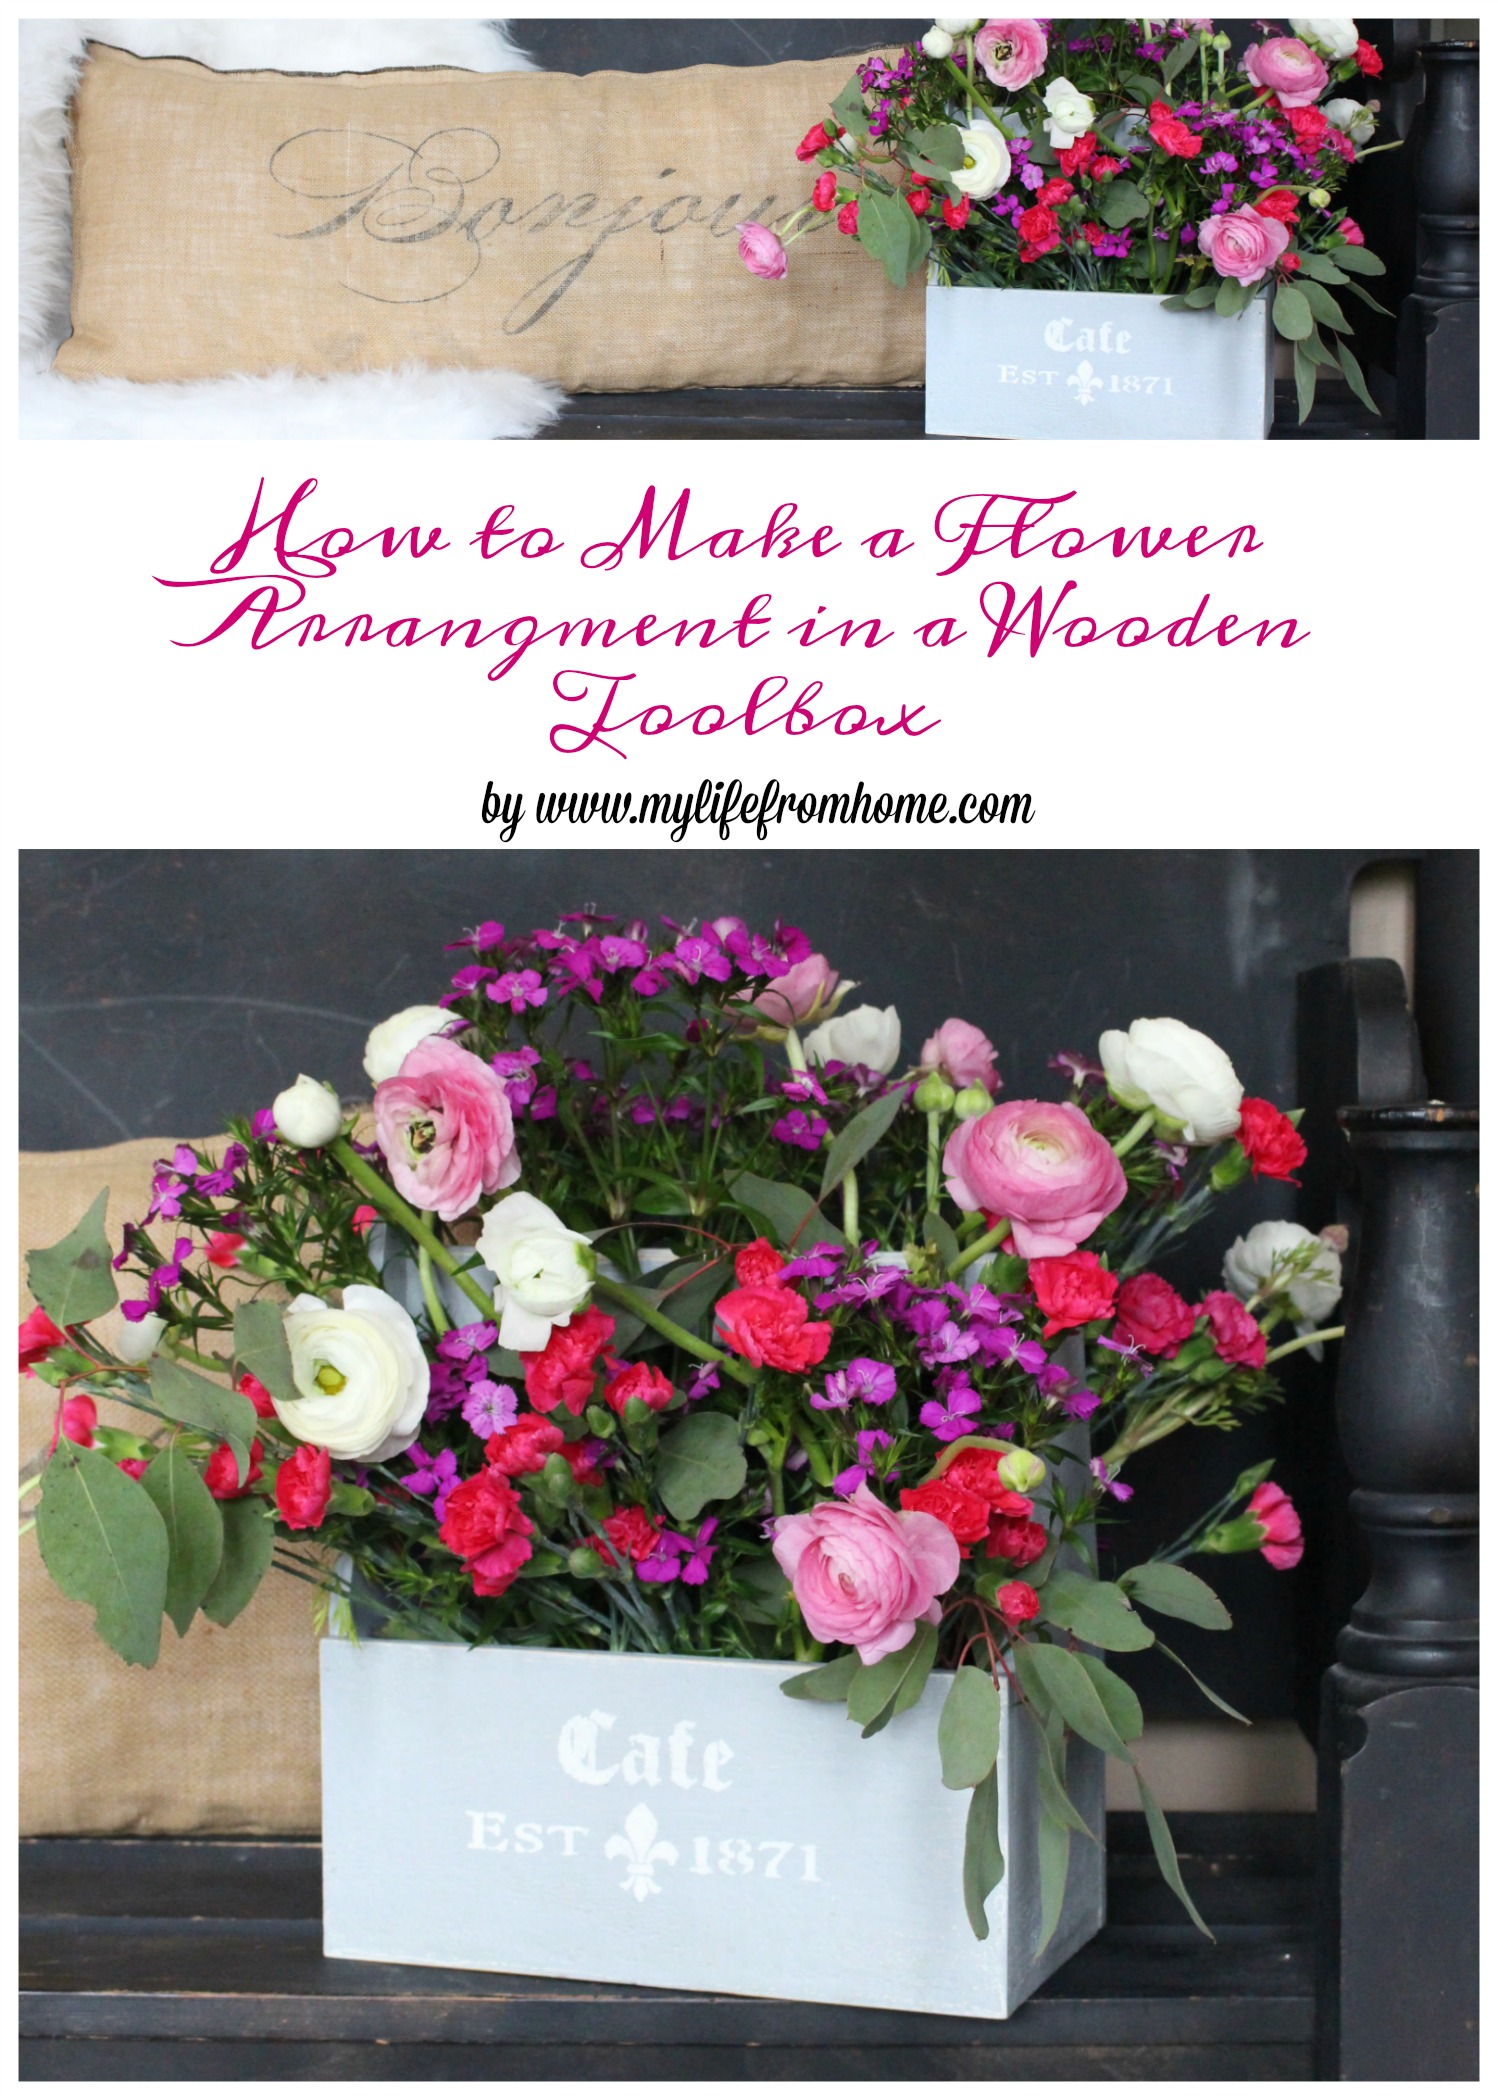 How to Make a Flower Arrangement in a Wooden Toolbox- flowers- arranging flowers- spring flowers- gardening indoors- farmhouse flowers- stenciled toolbox- french country flowers- cottage style